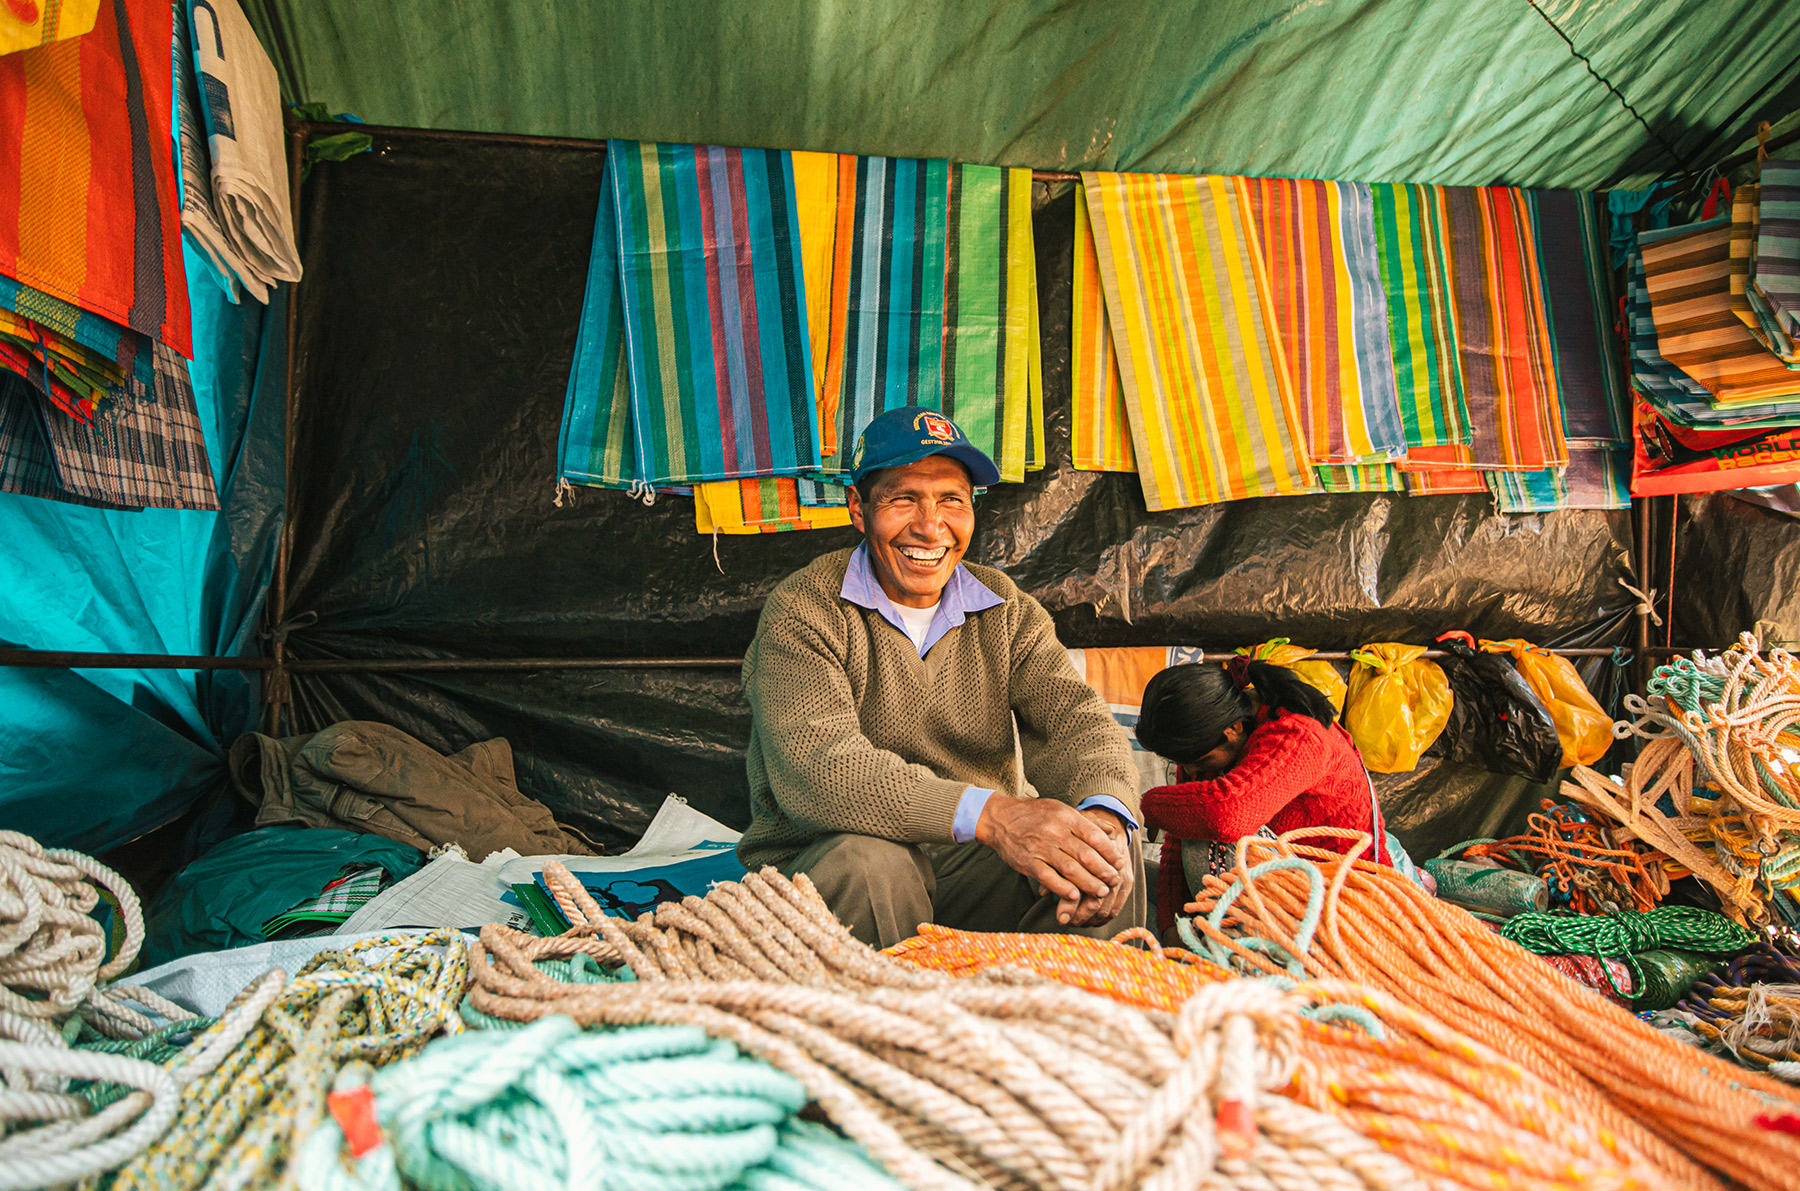 At the farmers market in the center square of Pitumarca, Peru, a man sits in his booth with all kinds of rope and material for sale.